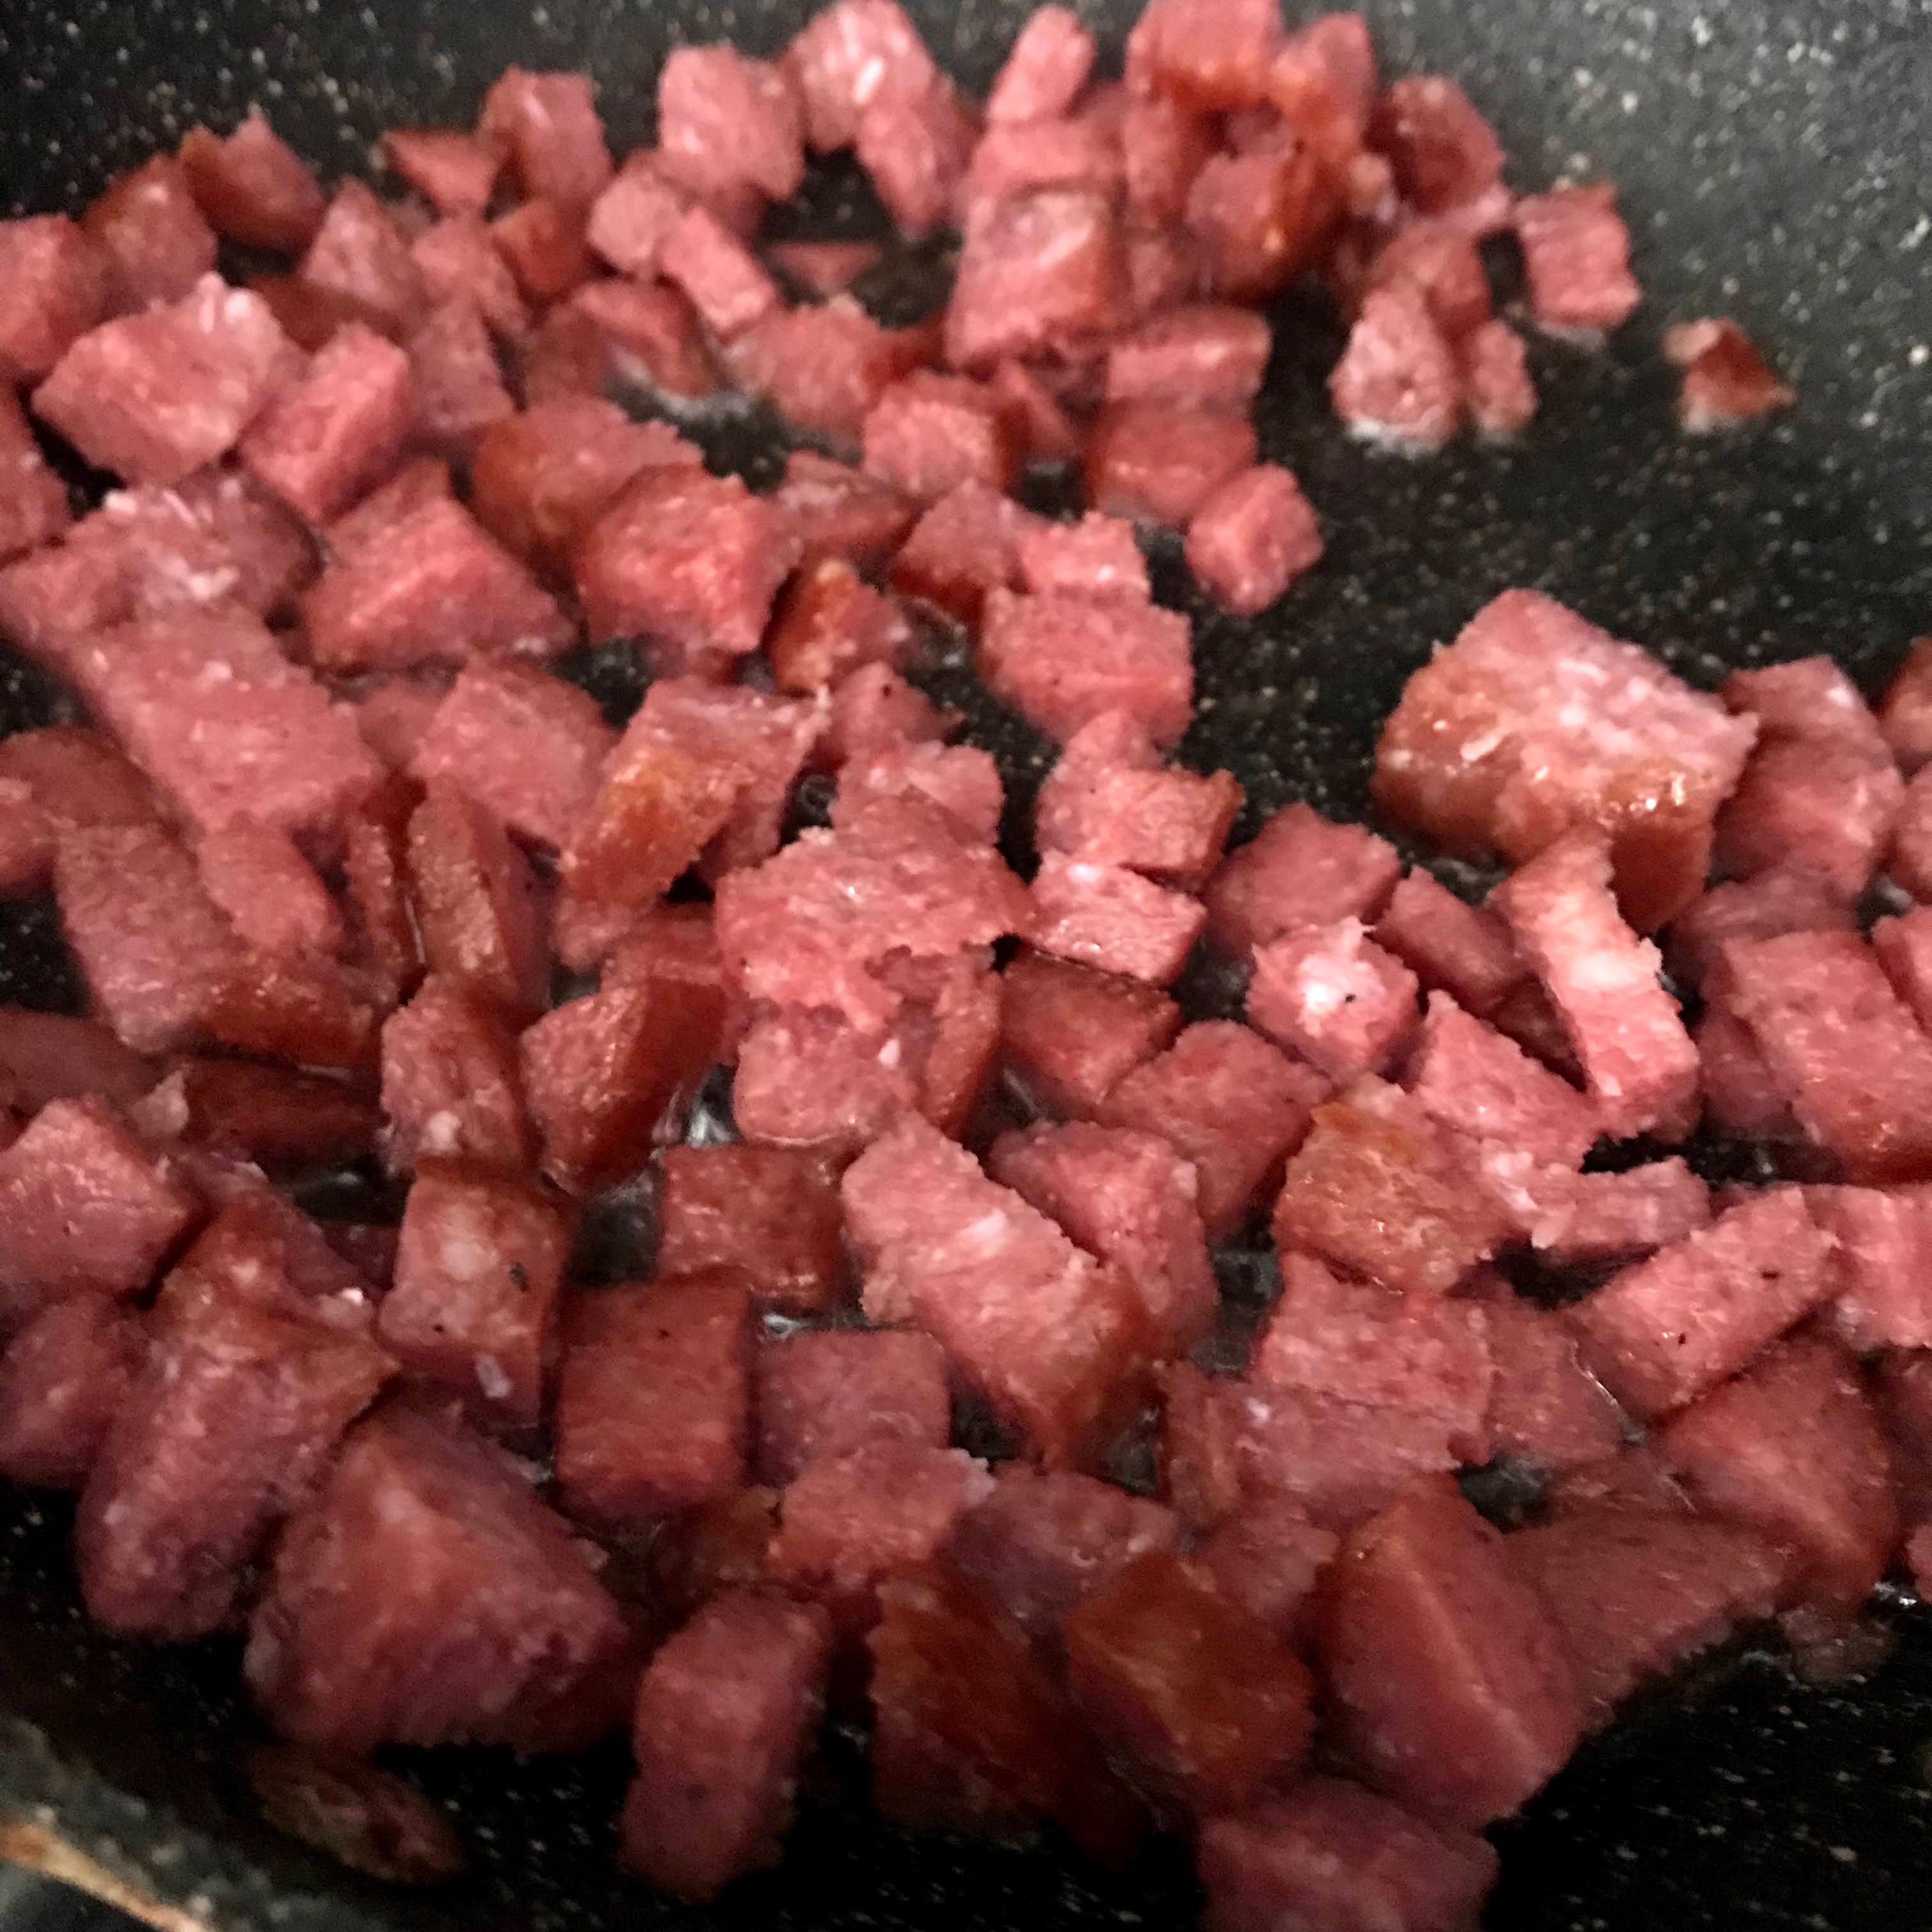 Fry the salami until crispy and drain on a paper towel until cool. Crumble into small bits,then place them into a large bowl.